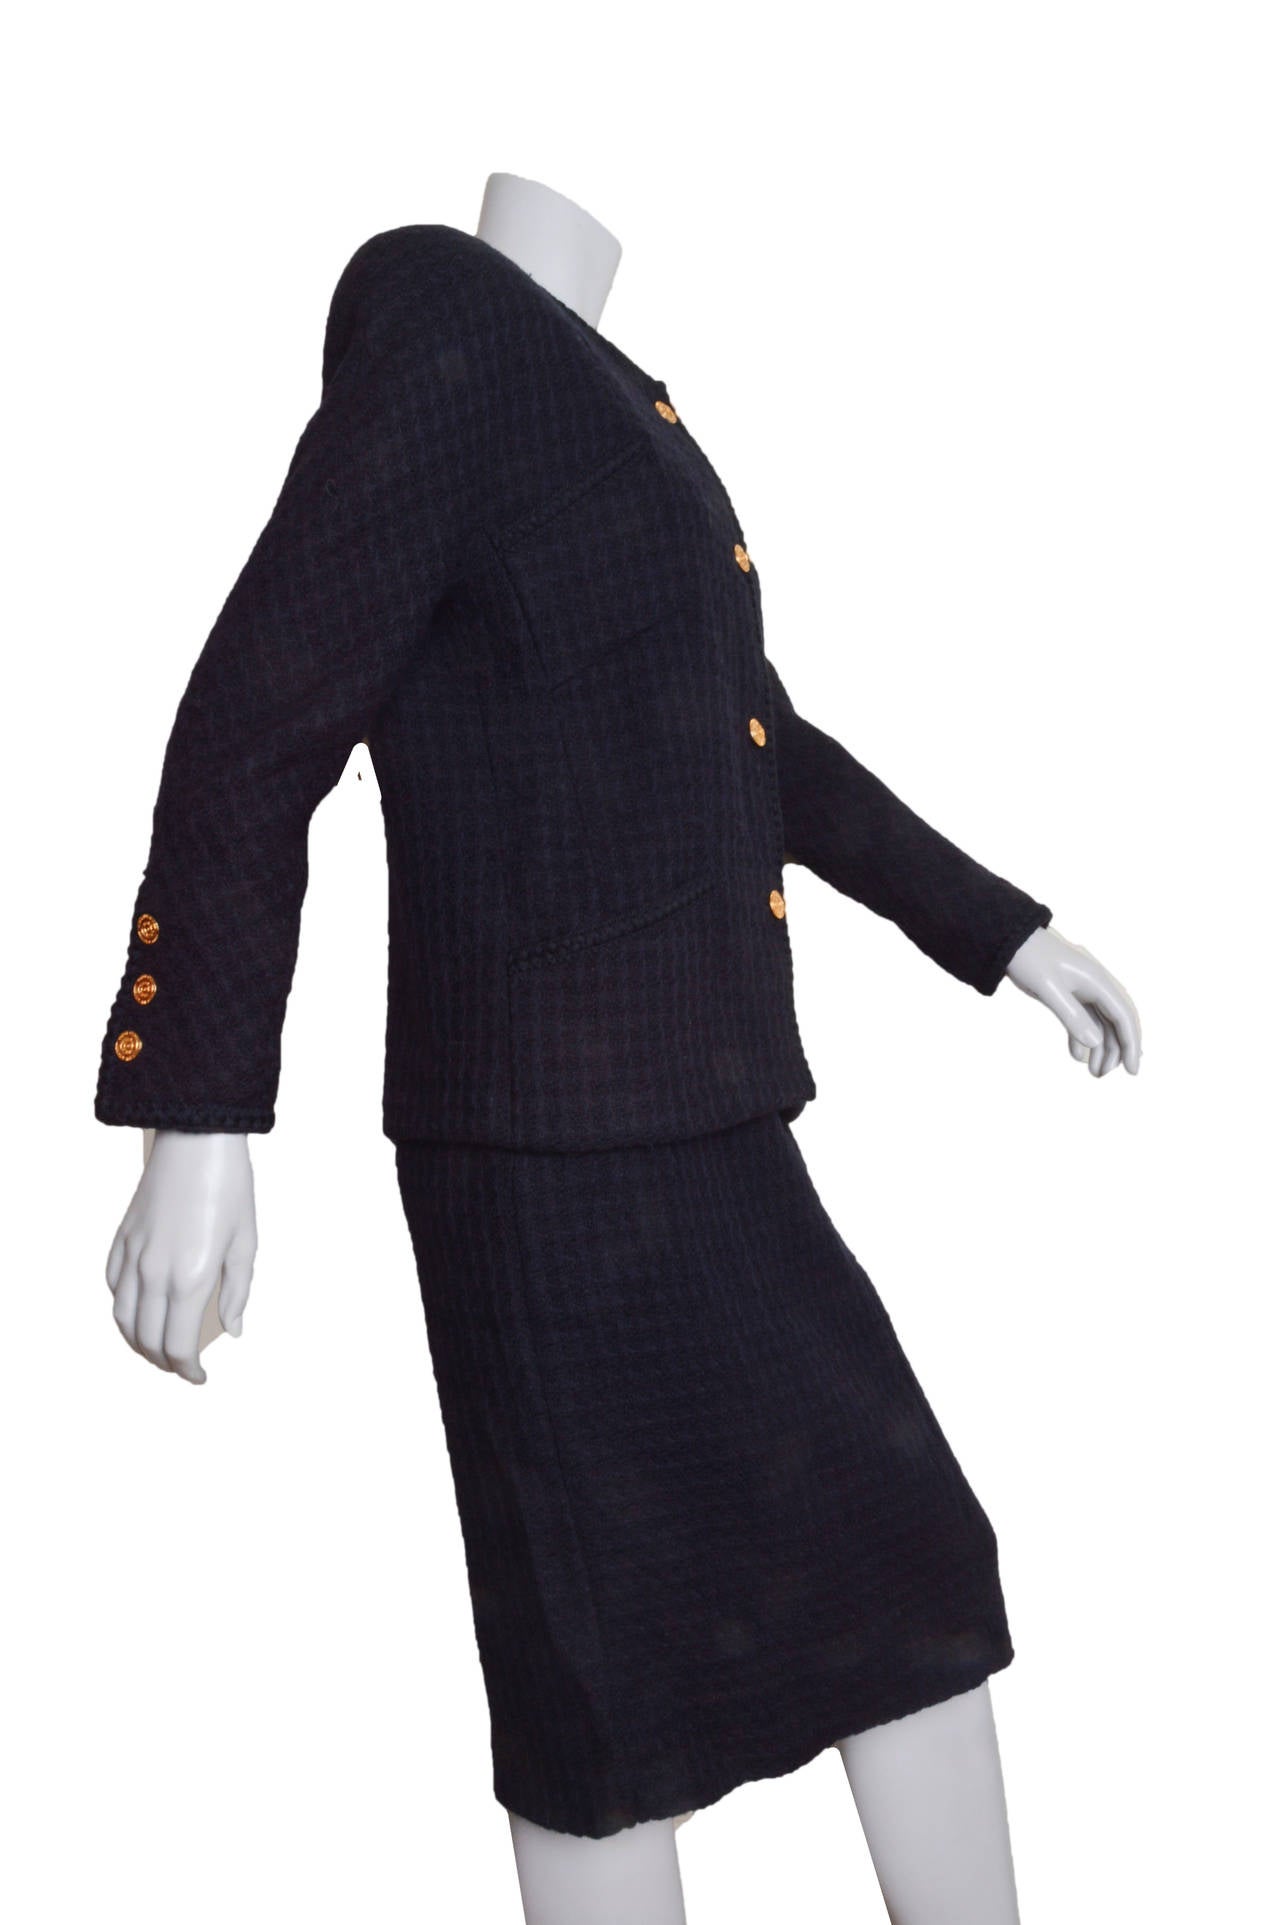 Understated and elegant vintage Chanel Boutique dark navy blue suit.
Boucle with a subtle woven pattern.
Jacket features classic braided trim, four pockets and
gold embossed Chanel buttons.
Gold chain sewn inside waist hem.
Slightly fitted